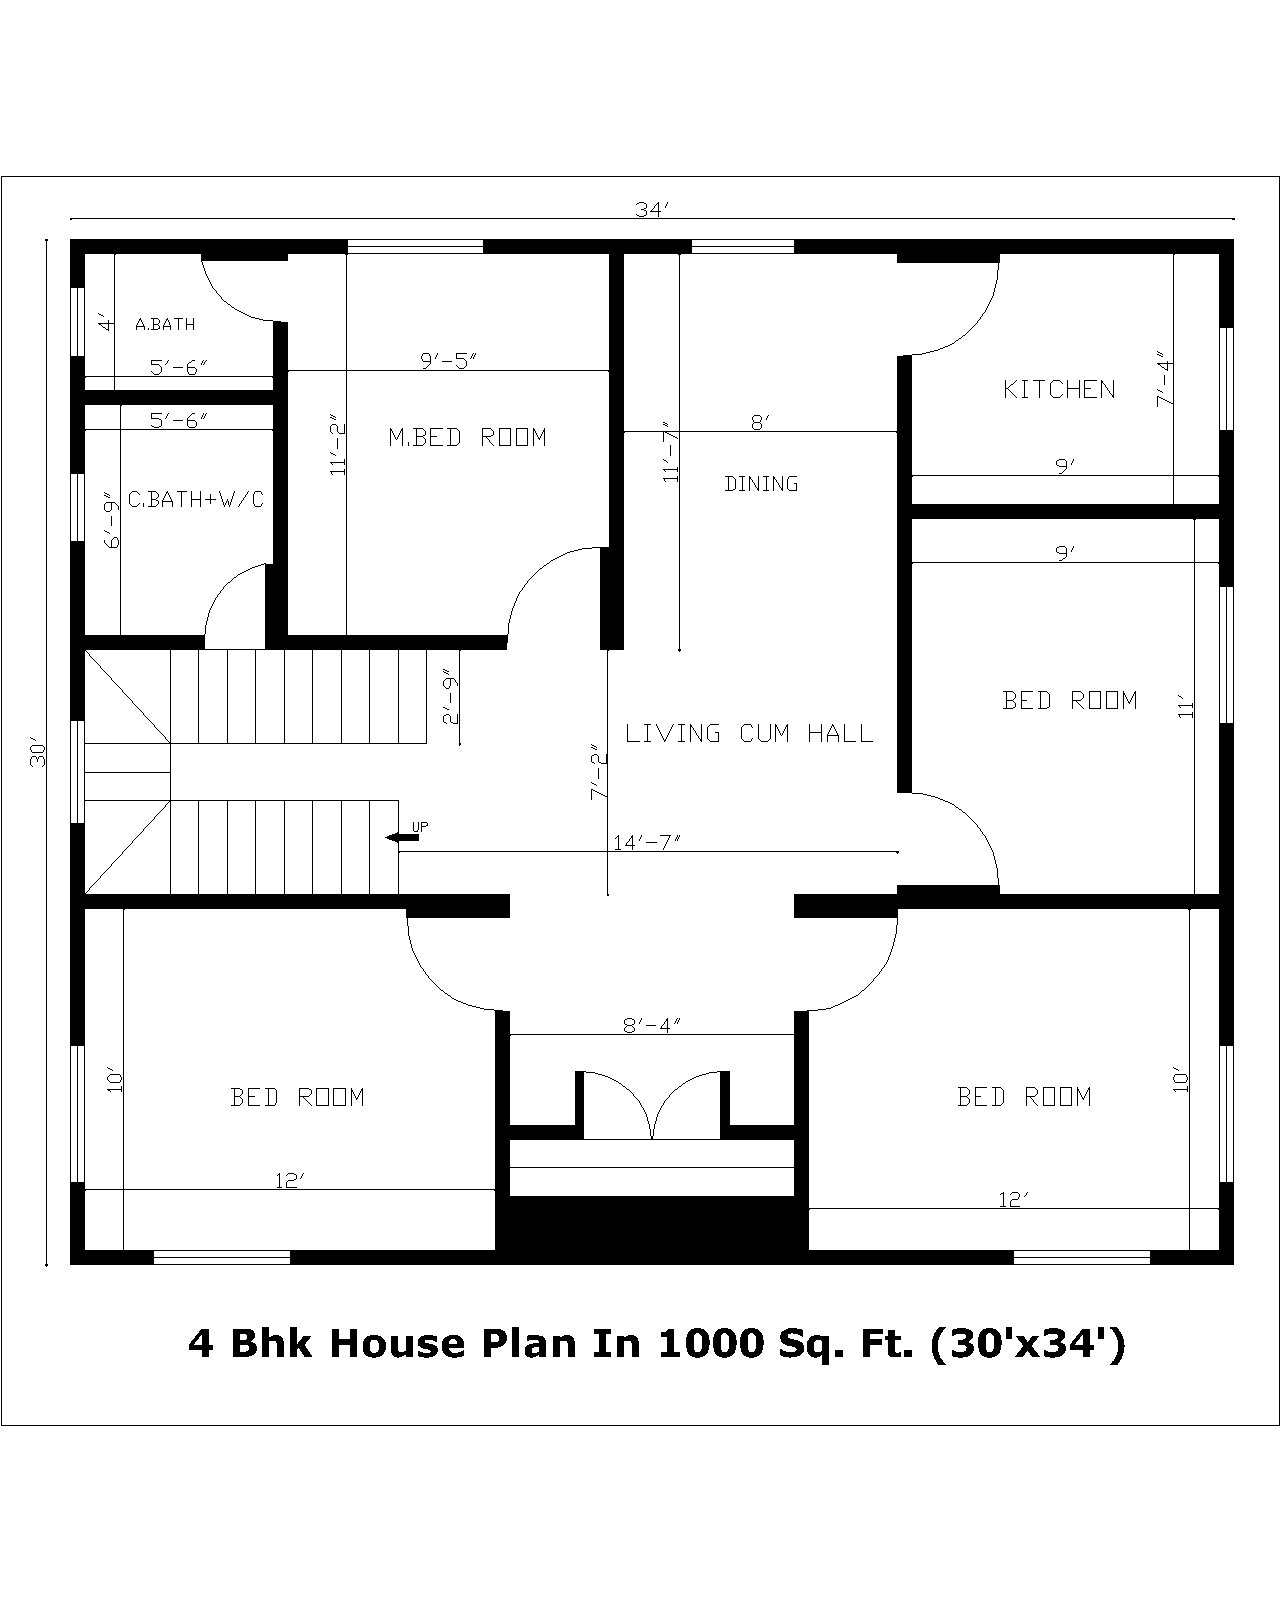 4 Bhk House Plan In 1000 Sq. Ft. (30'x34')